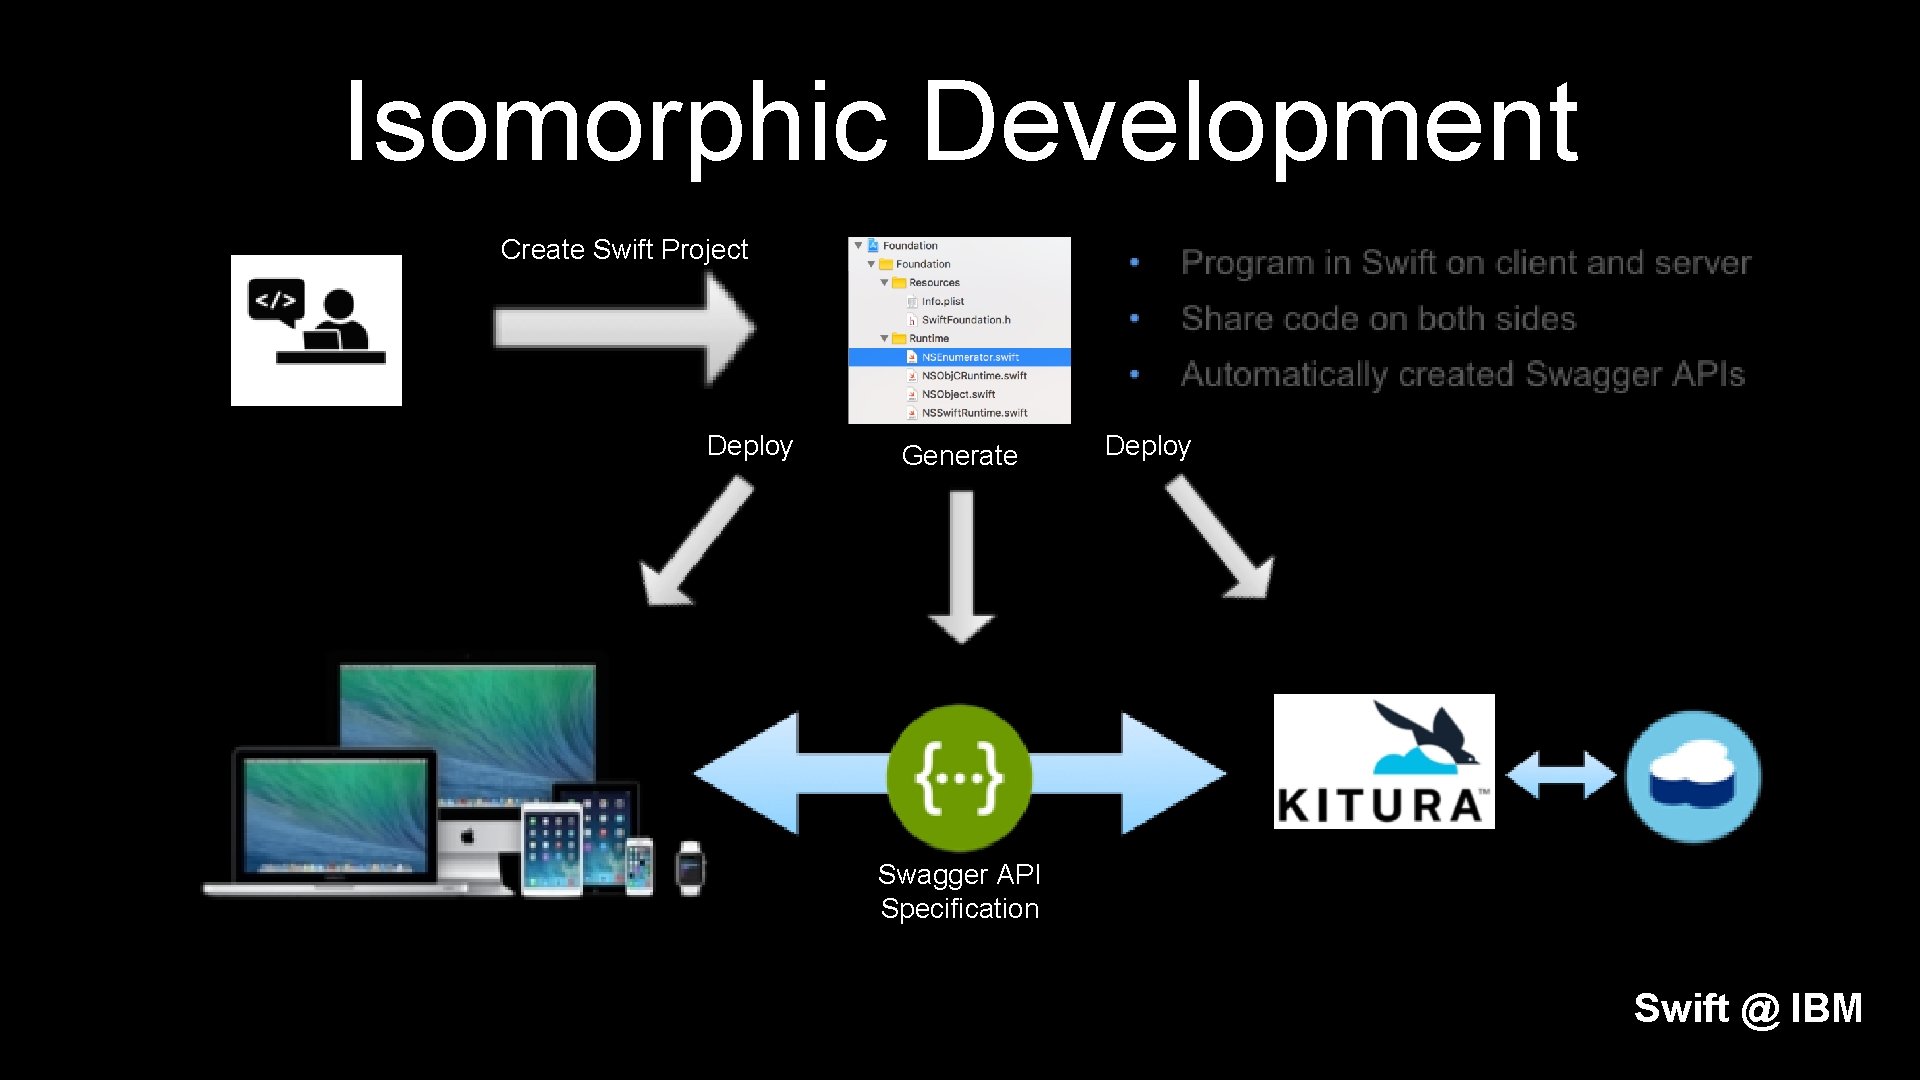 Isomorphic Development Create Swift Project Deploy Generate Deploy Swagger API Specification Swift @ IBM